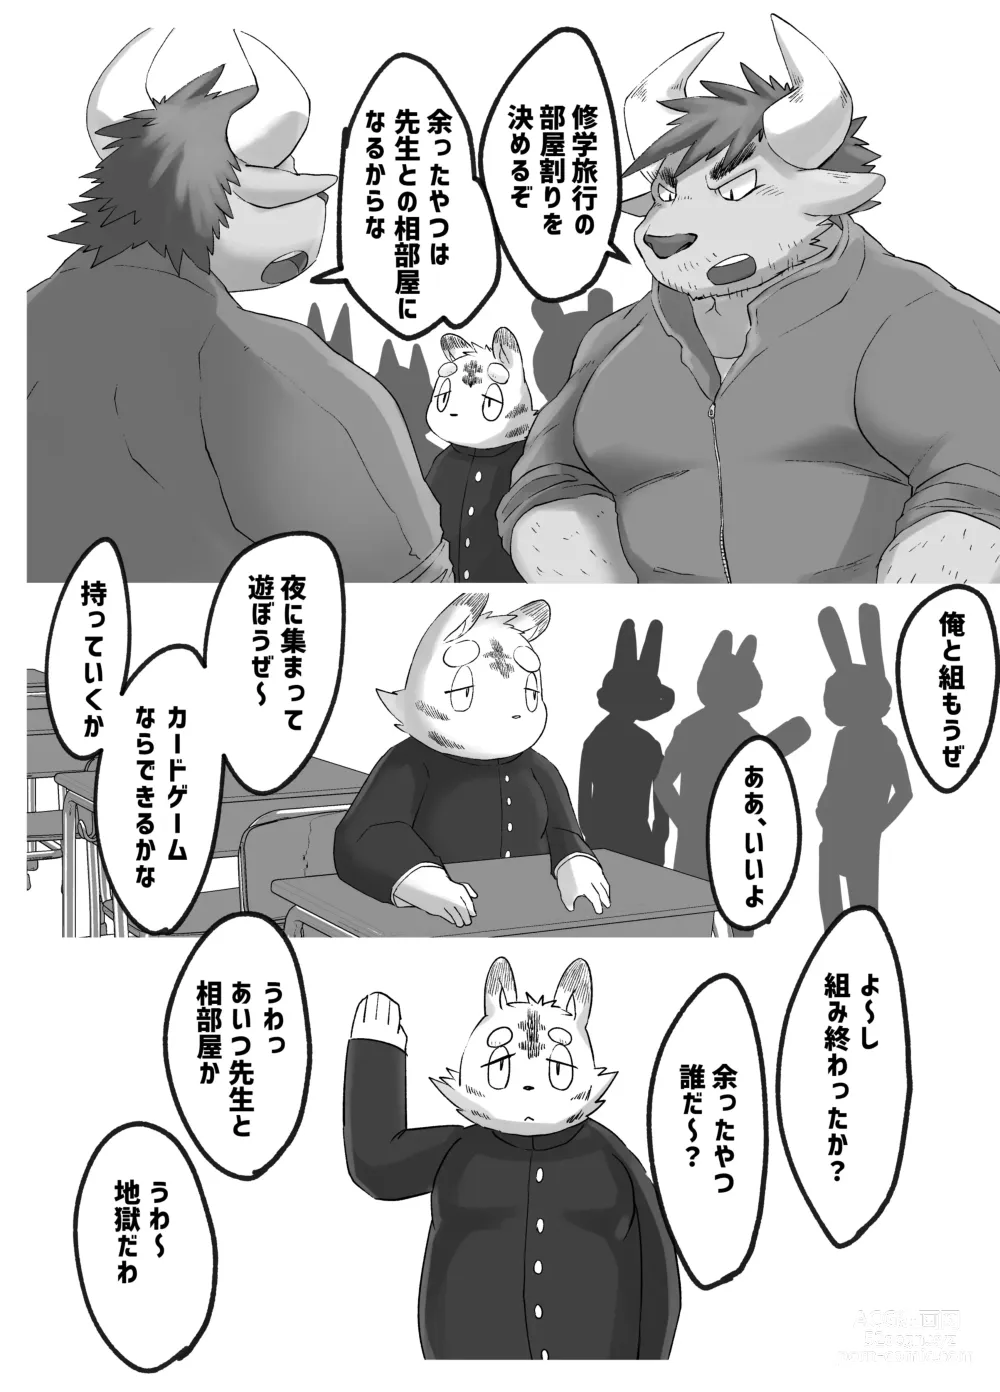 Page 2 of doujinshi Muscular Bull Teacher & Chubby Tiger Student 3